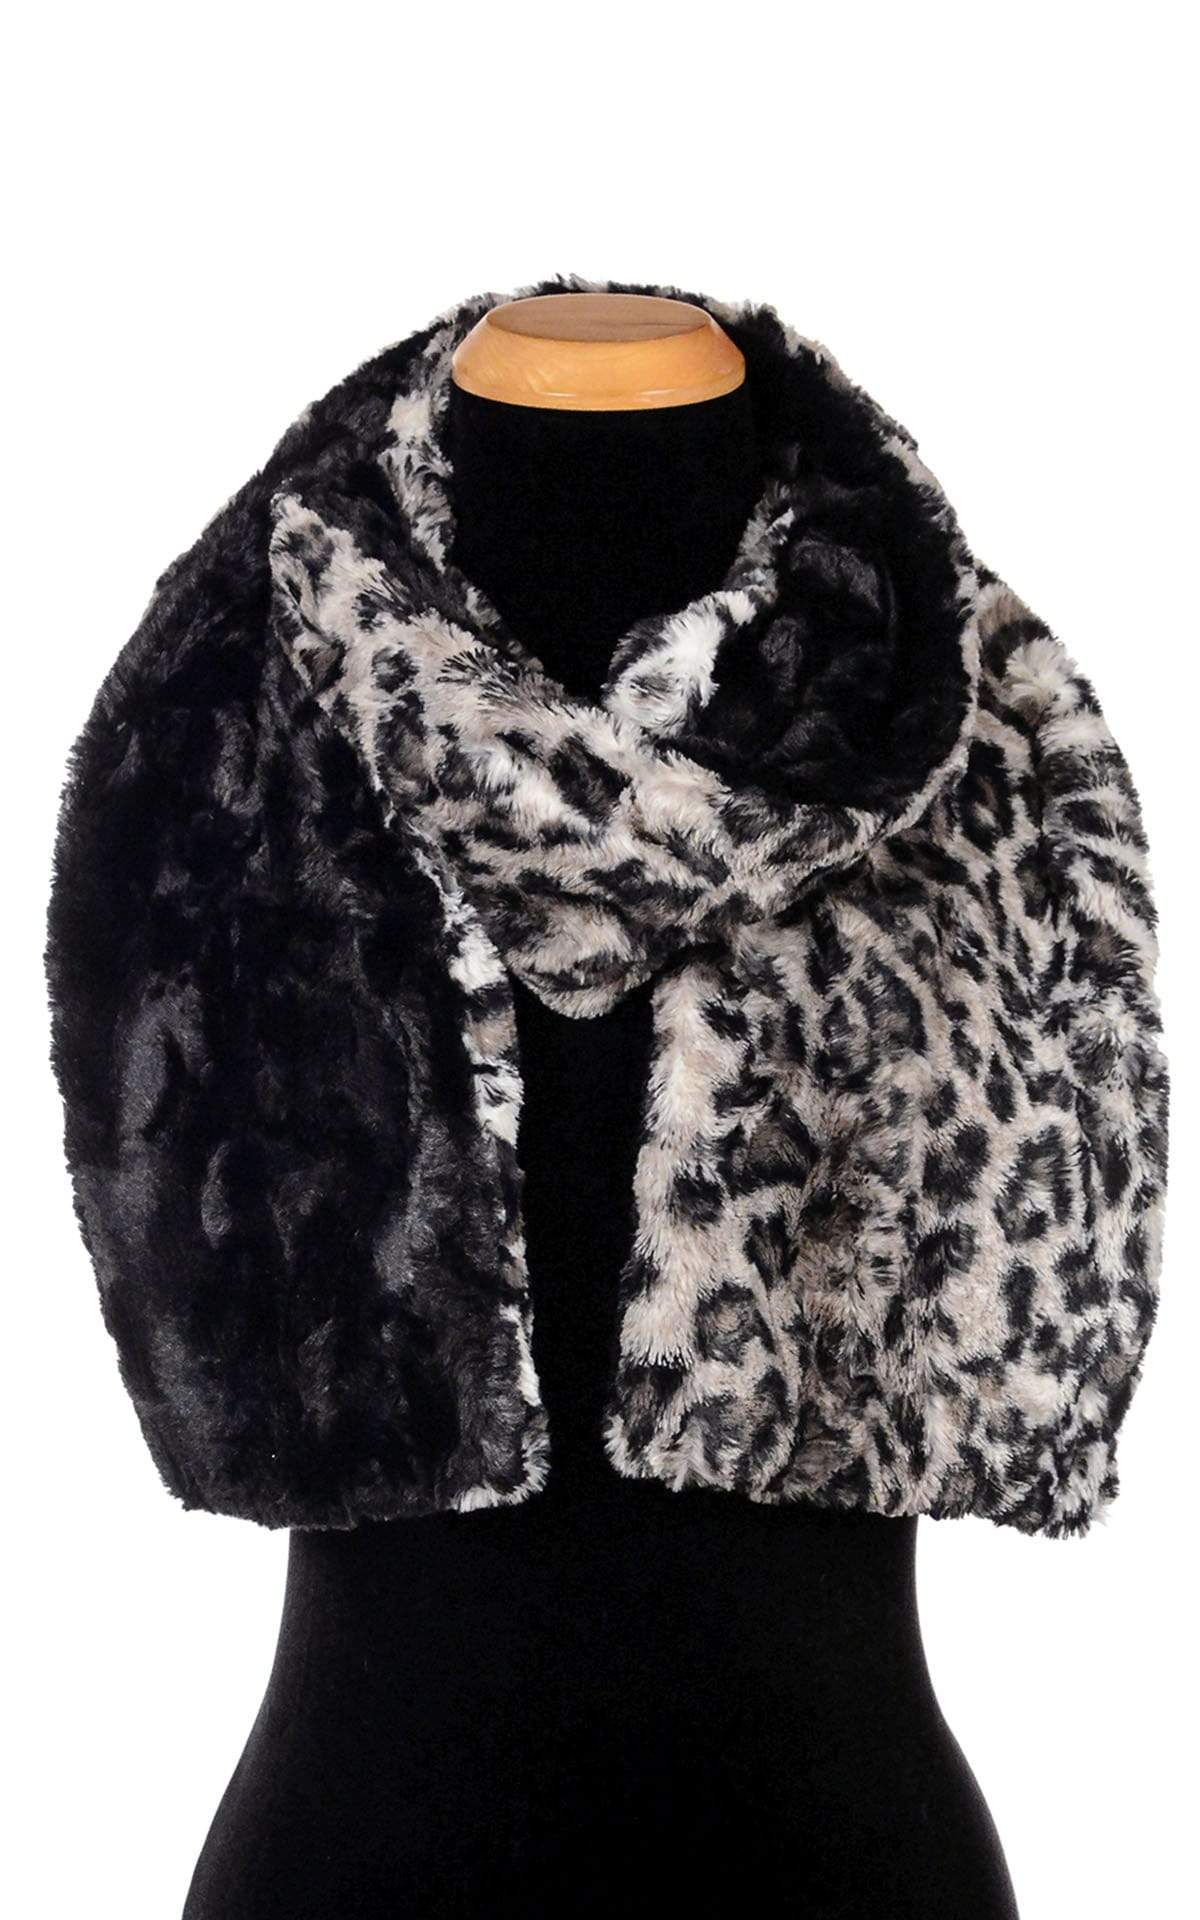 Women’s Product shot on mannequin of Two-tone Classic Scarf | Savannah Cat animal print Faux Fur with cuddly black | Handmade by Pandemonium Millinery Seattle, WA USAof Classic Skinny Scarf | Savannah Cat animal print Faux Fur | Handmade by Pandemonium Millinery Seattle, WA USA